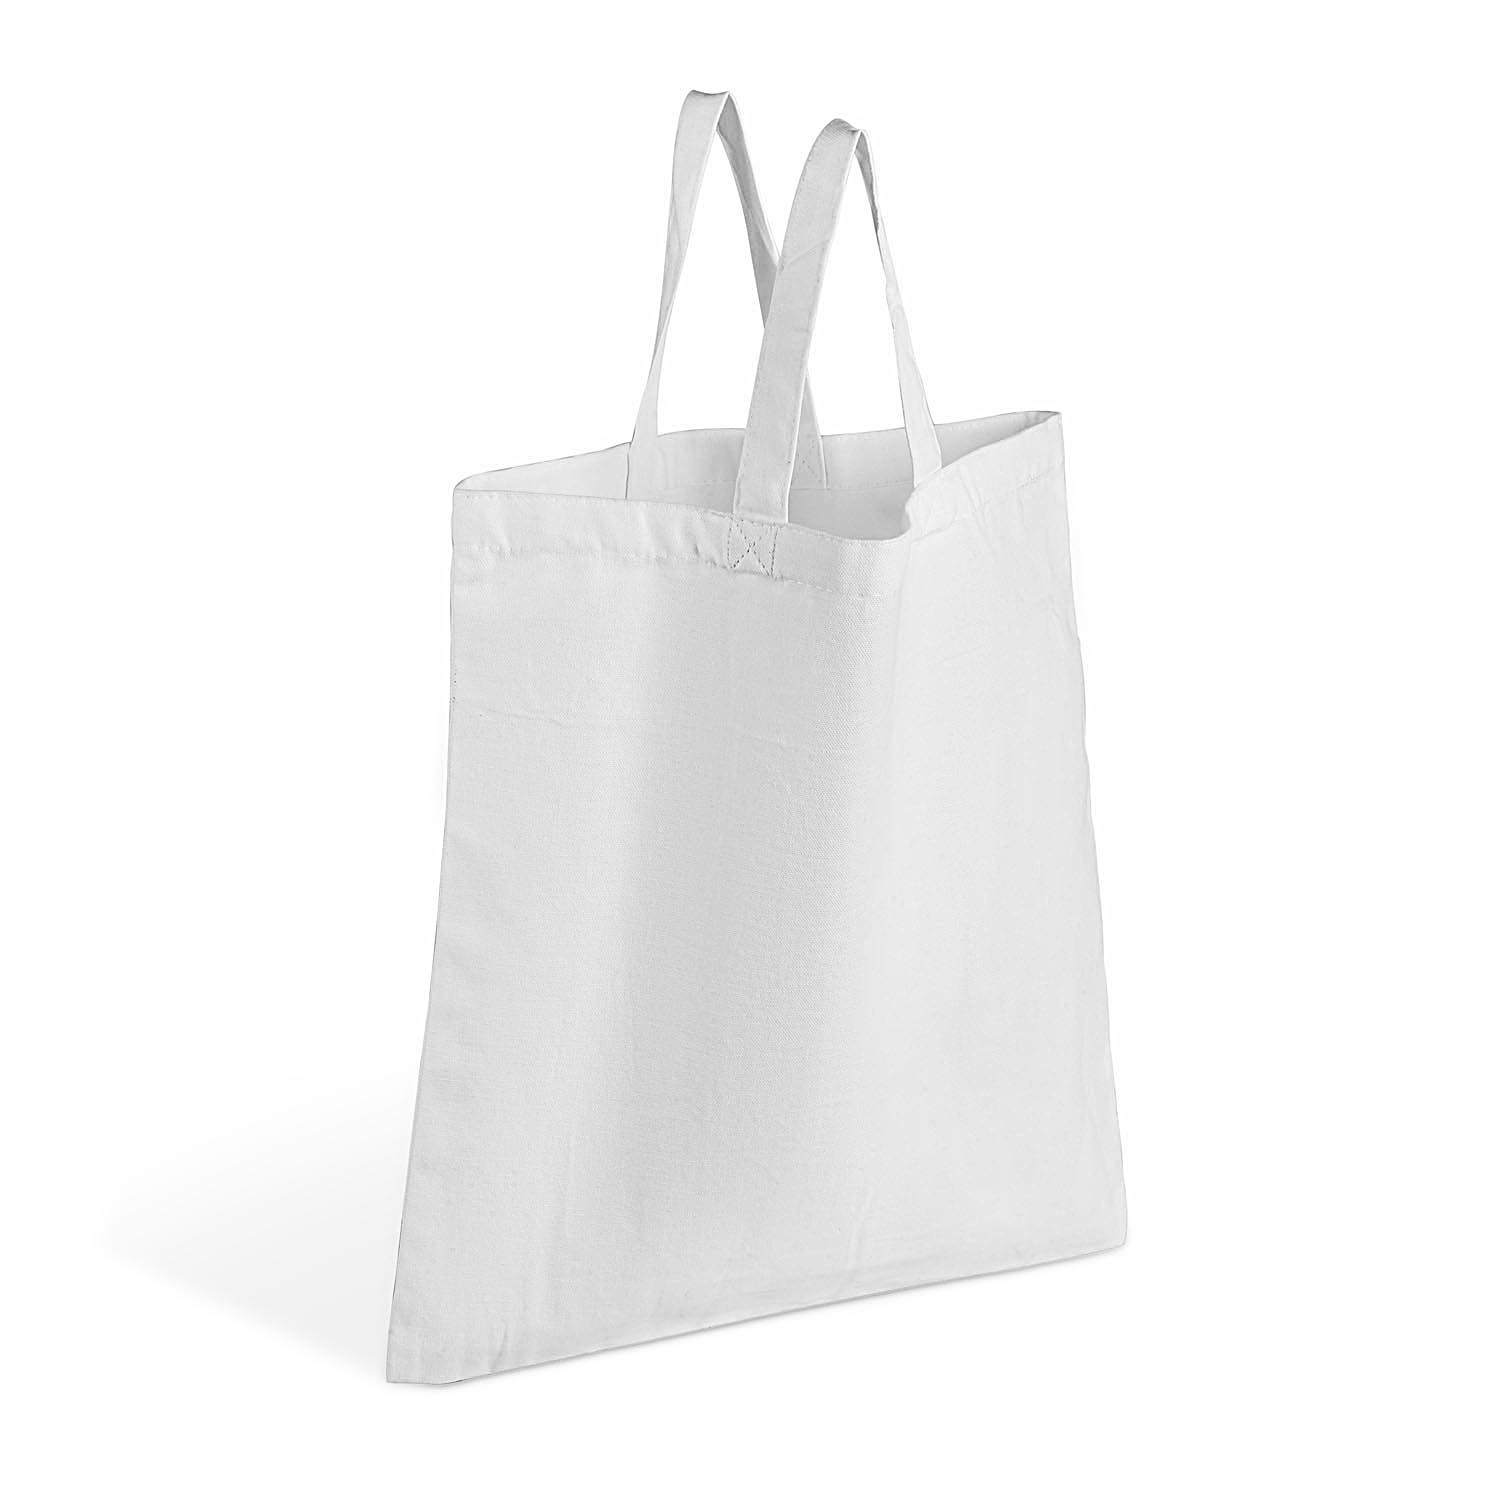 Amazon.com: LITO LINEN AND TOWEL Tote Bag|Shopping Bags with Handle Blank Canvas  Tote Bags for DIY Branding Gift Cloth Bags Reusable Grocery Bag 3 Pack :  Home & Kitchen